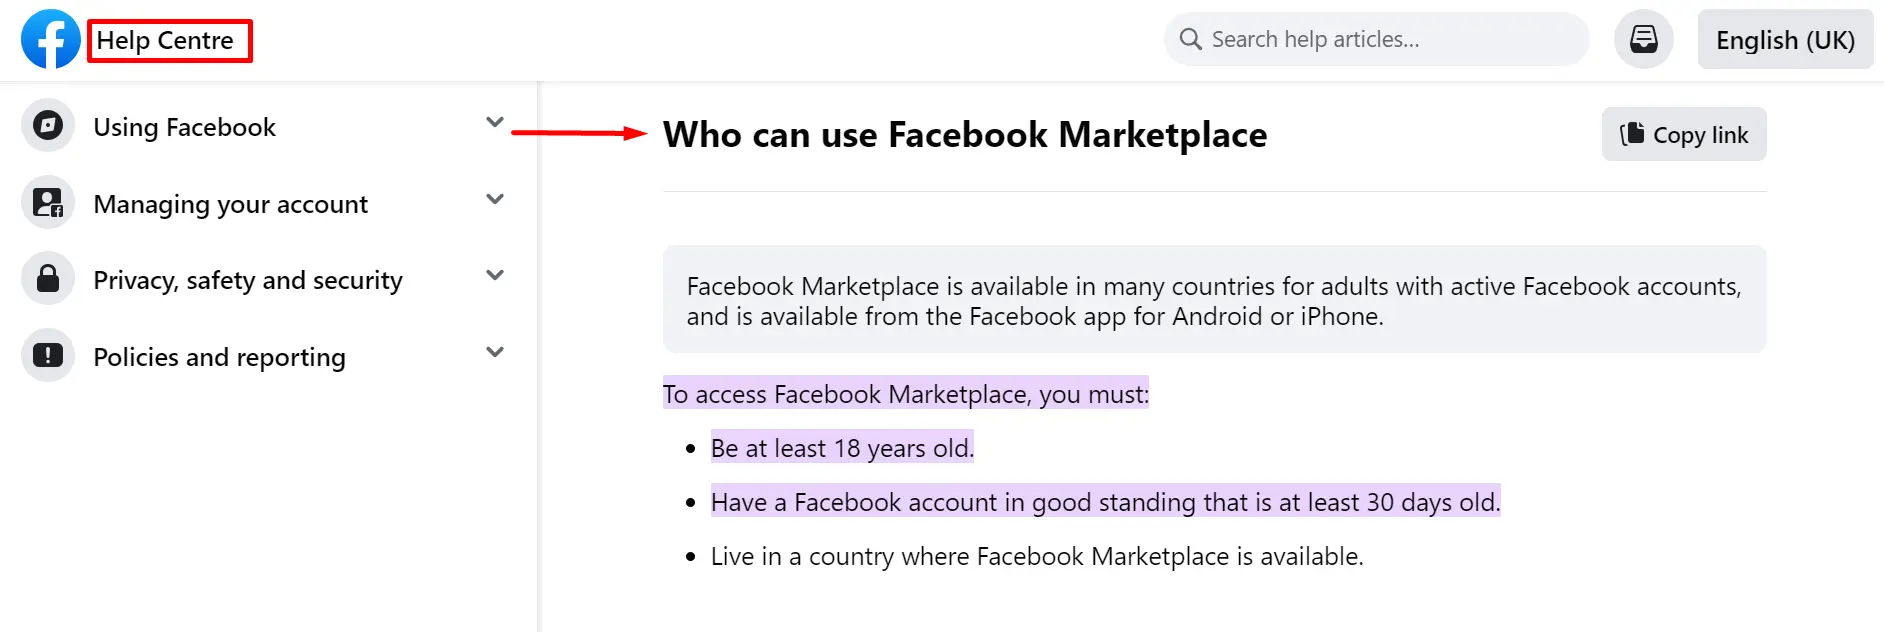 Who can Use Facebook Marketplace